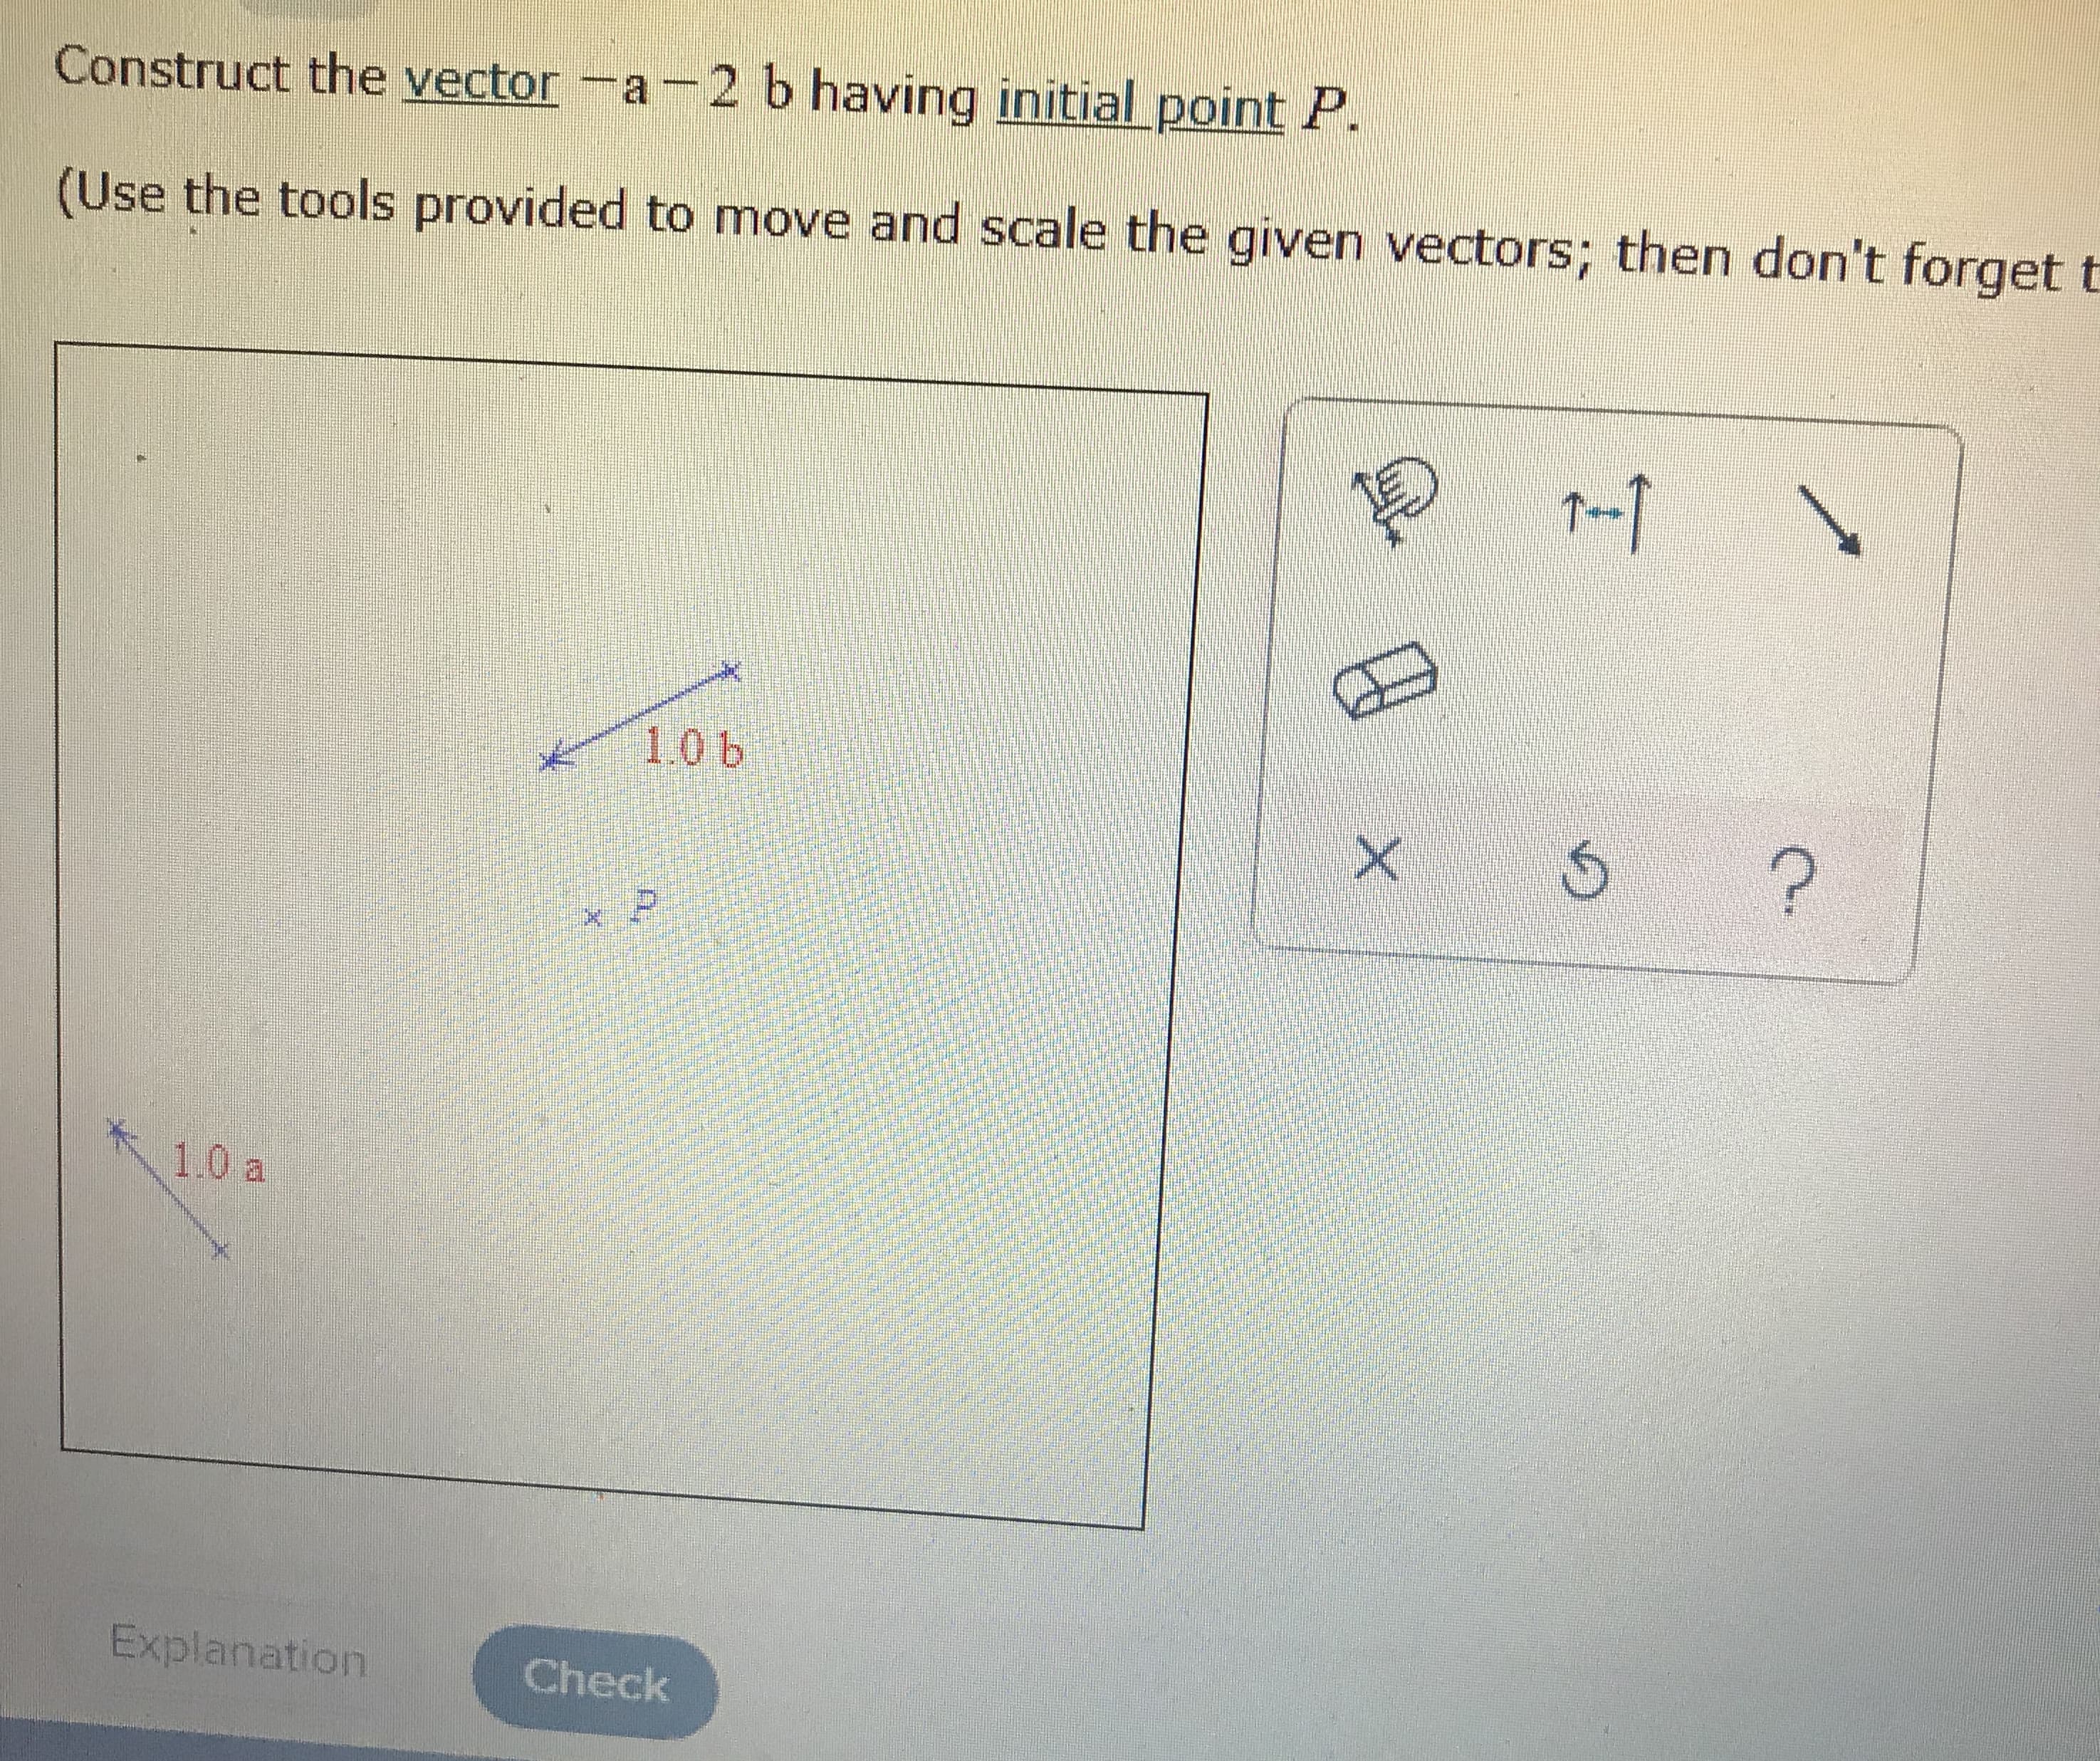 Construct the vector -a-2 b having initial point P.
